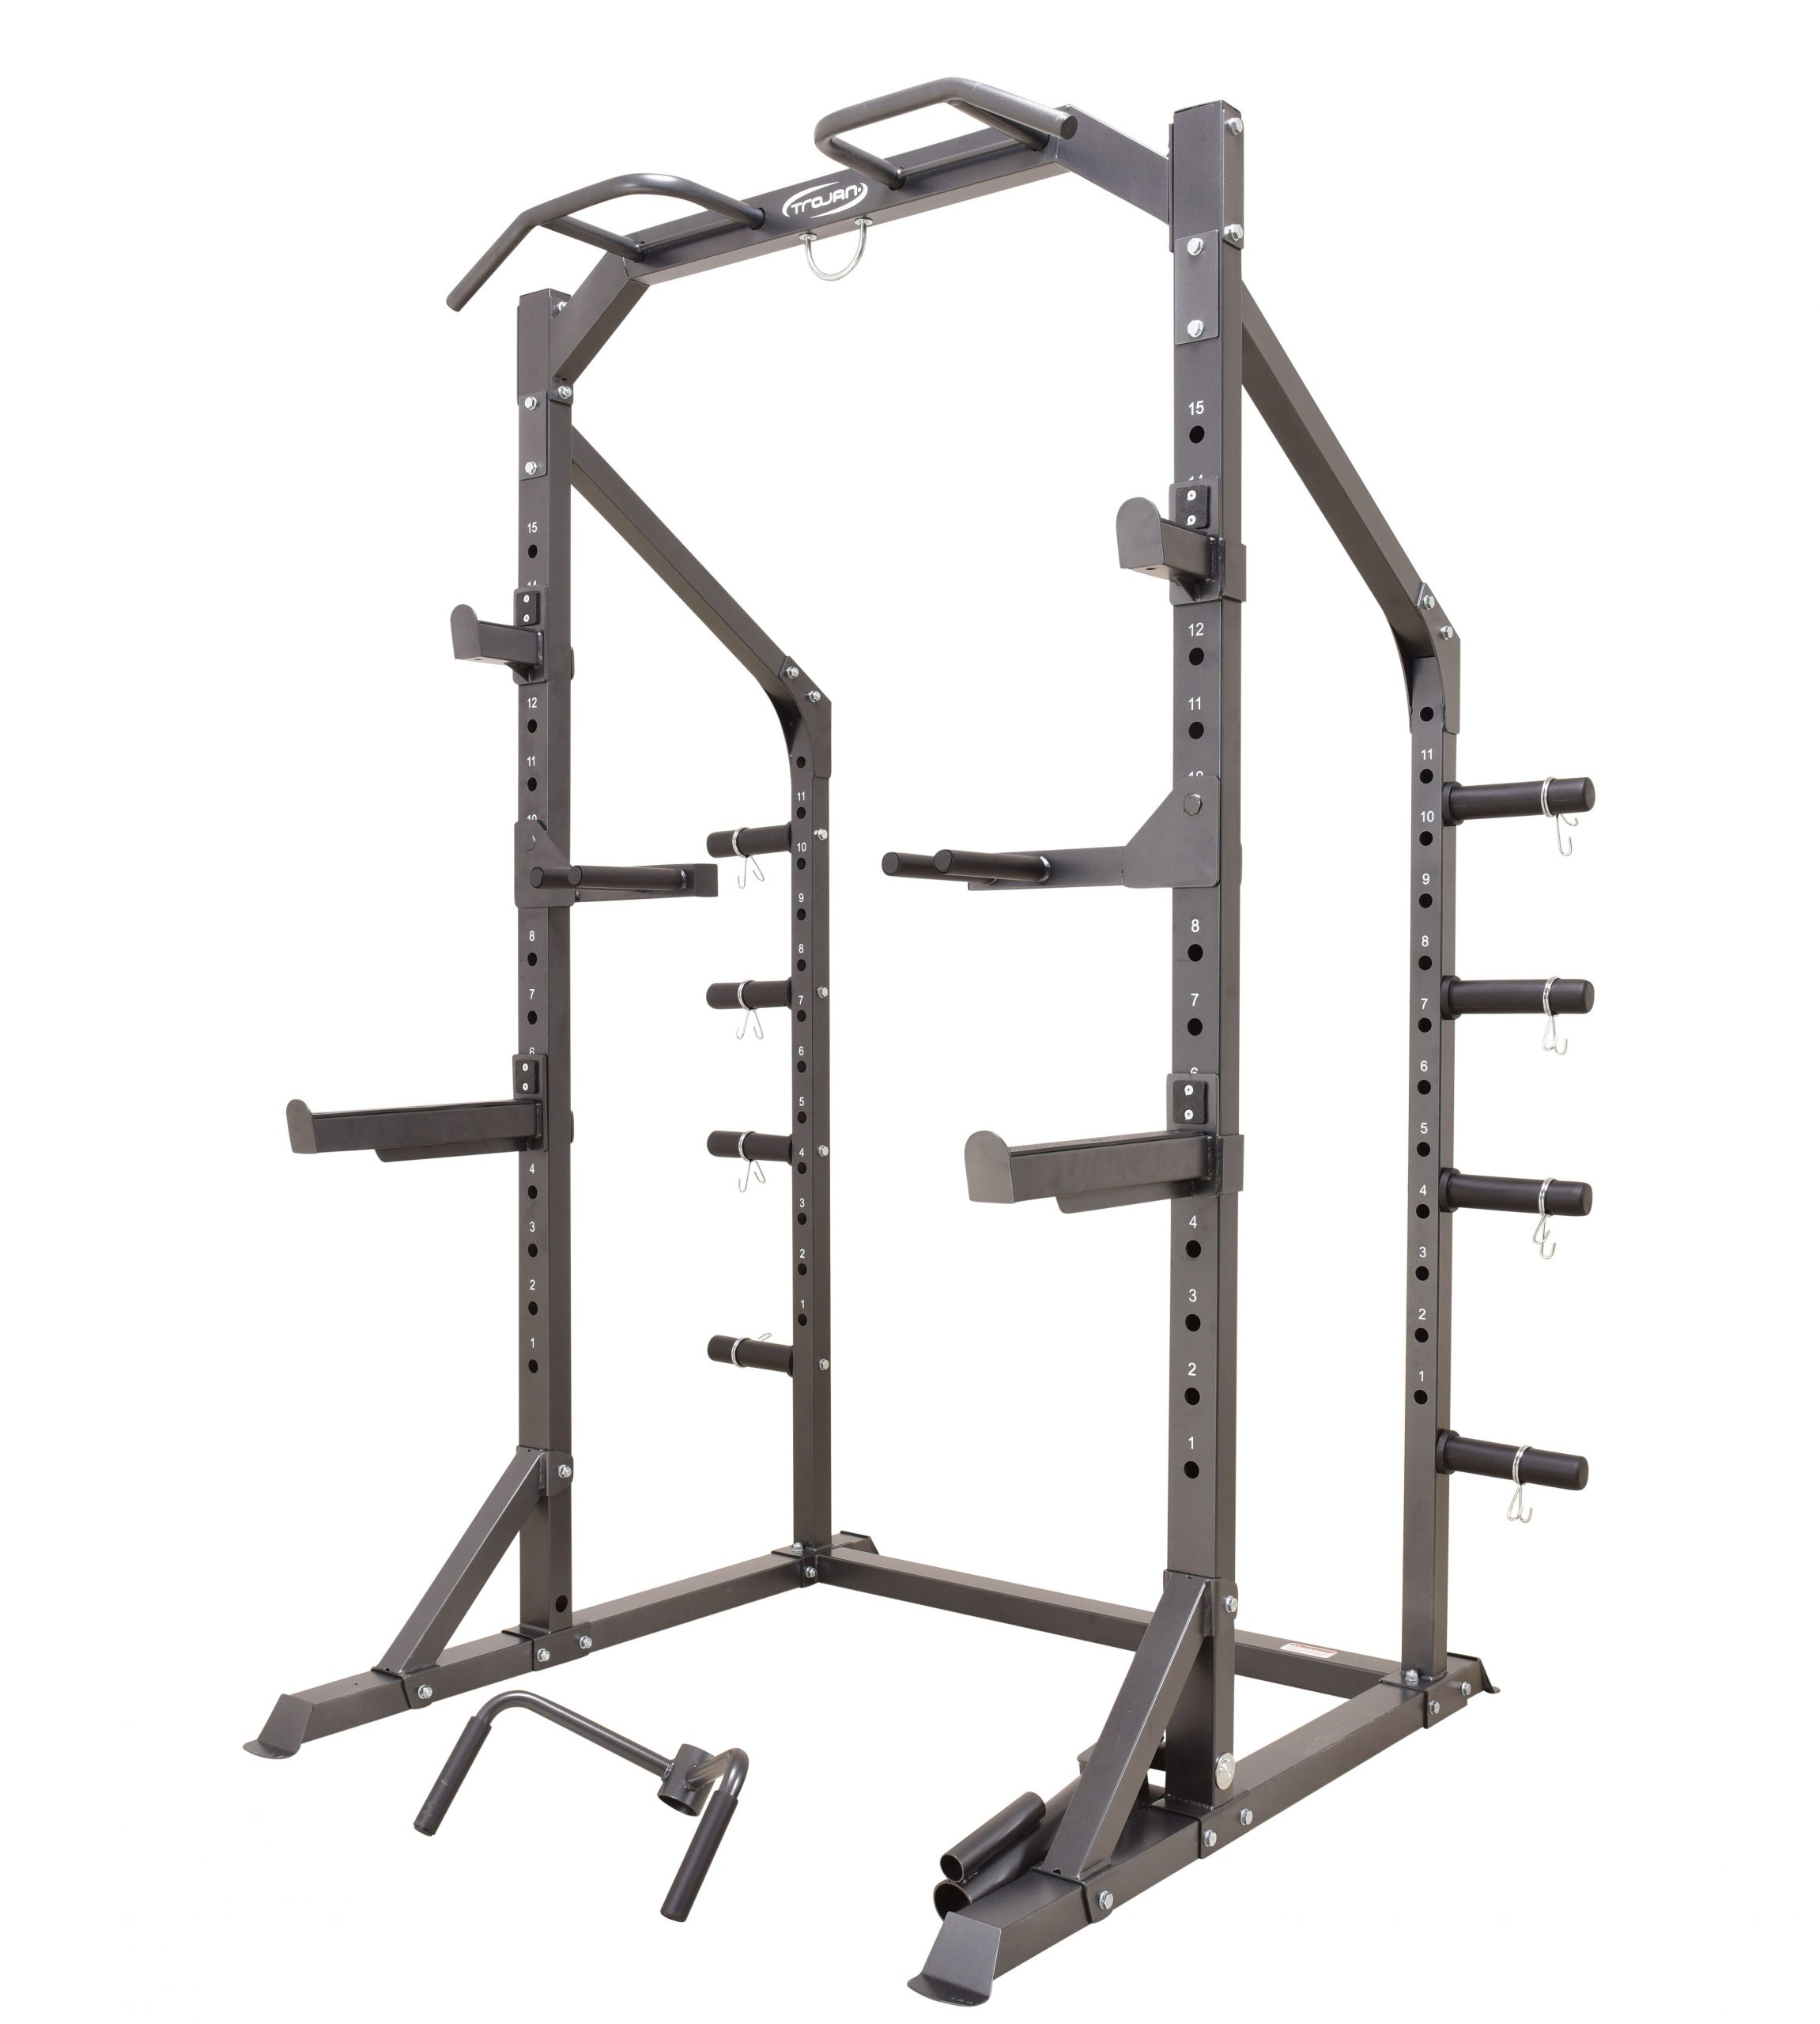 Power Rack Chin Up Olympic Barbell 7' 20 KG 1500 Lbs + 150 Kg Olympic Bumper Plates + Trap Bar